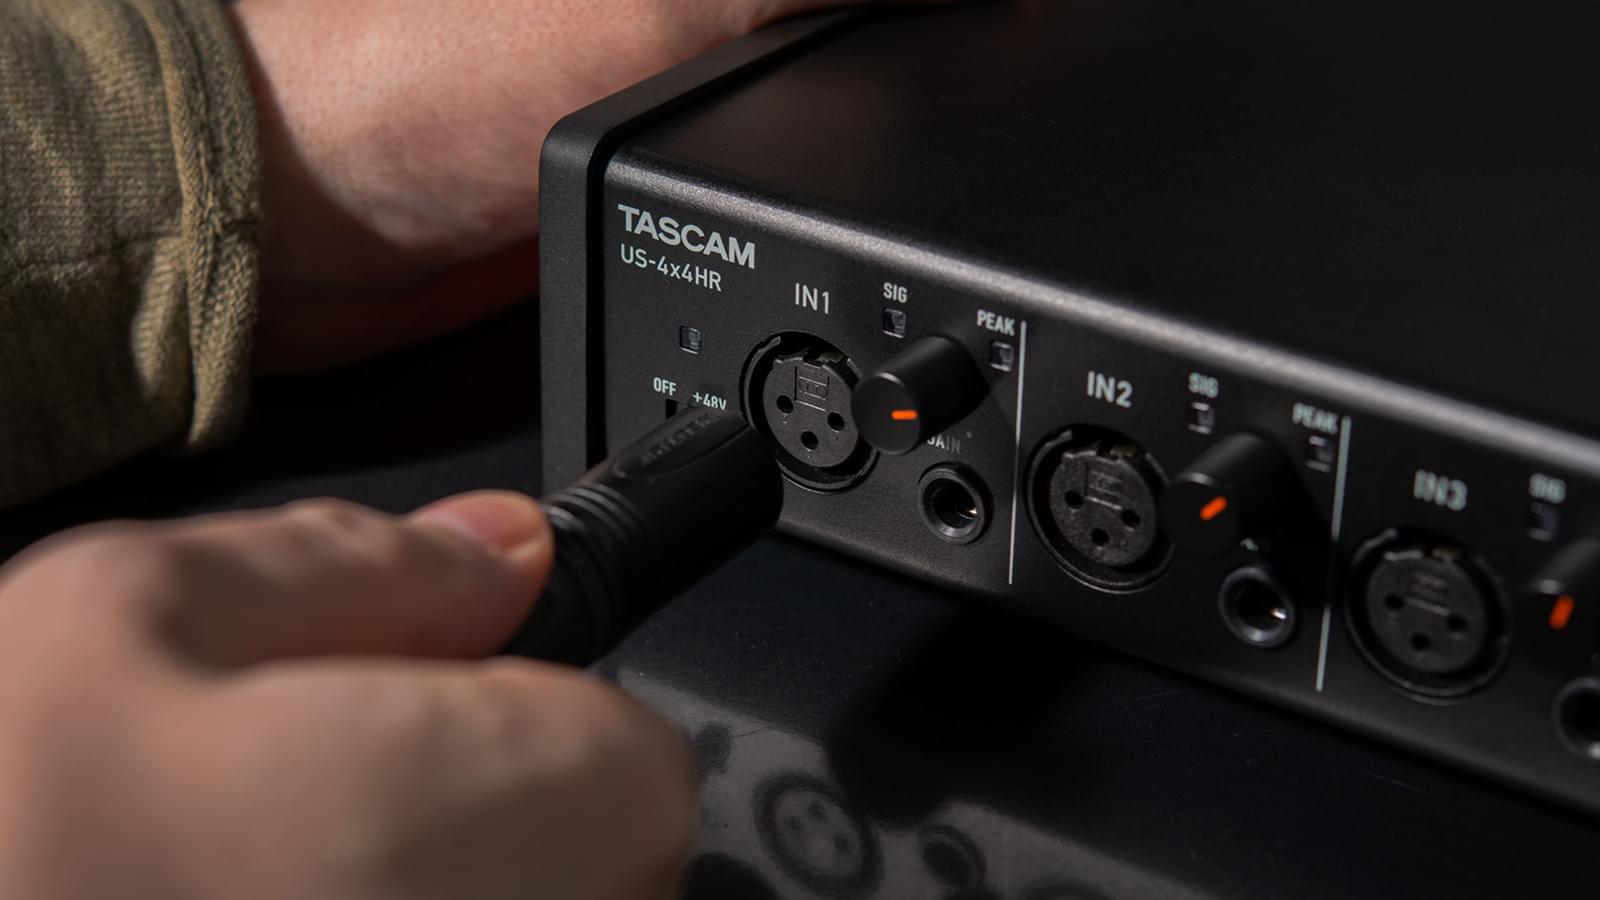 Tascam Us 4x4hr High Resolution Usb Audio Midi Interface 4 In 4 Out